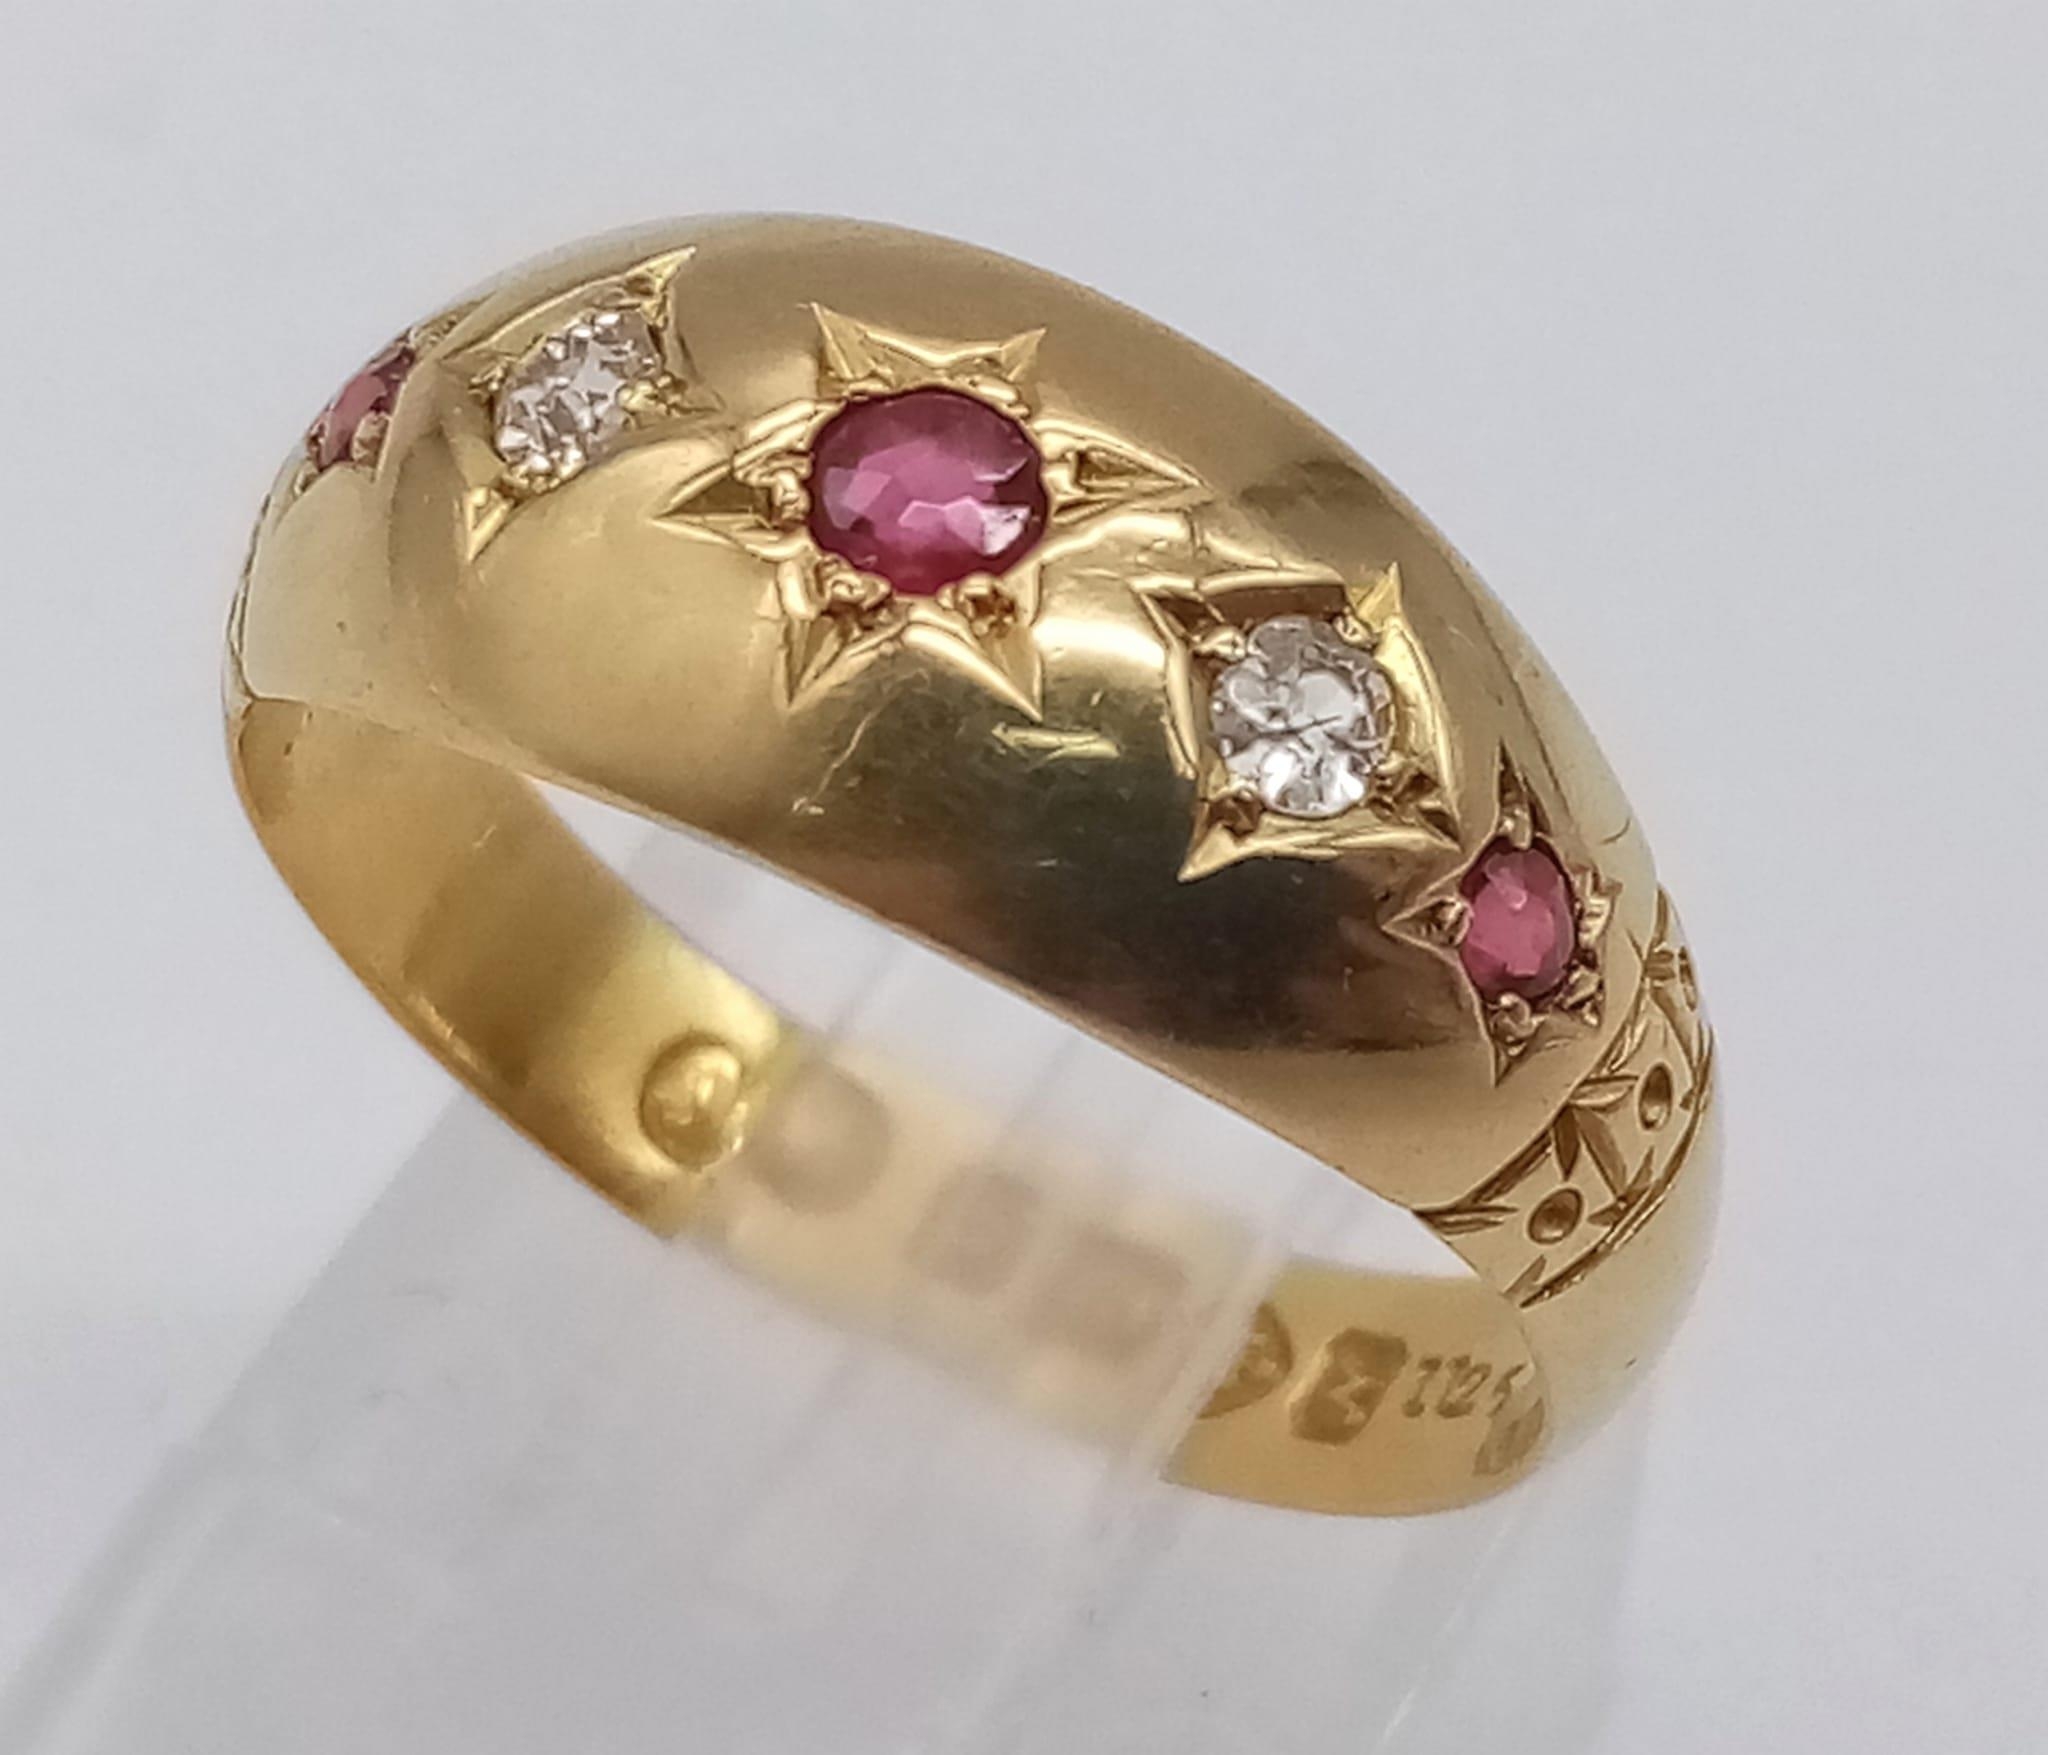 A VINTAGE 18K YELLOW GOLD, OLD CUT DIAMOND & RUBY RING. Size M/N, 2.5g total weight. - Image 2 of 5